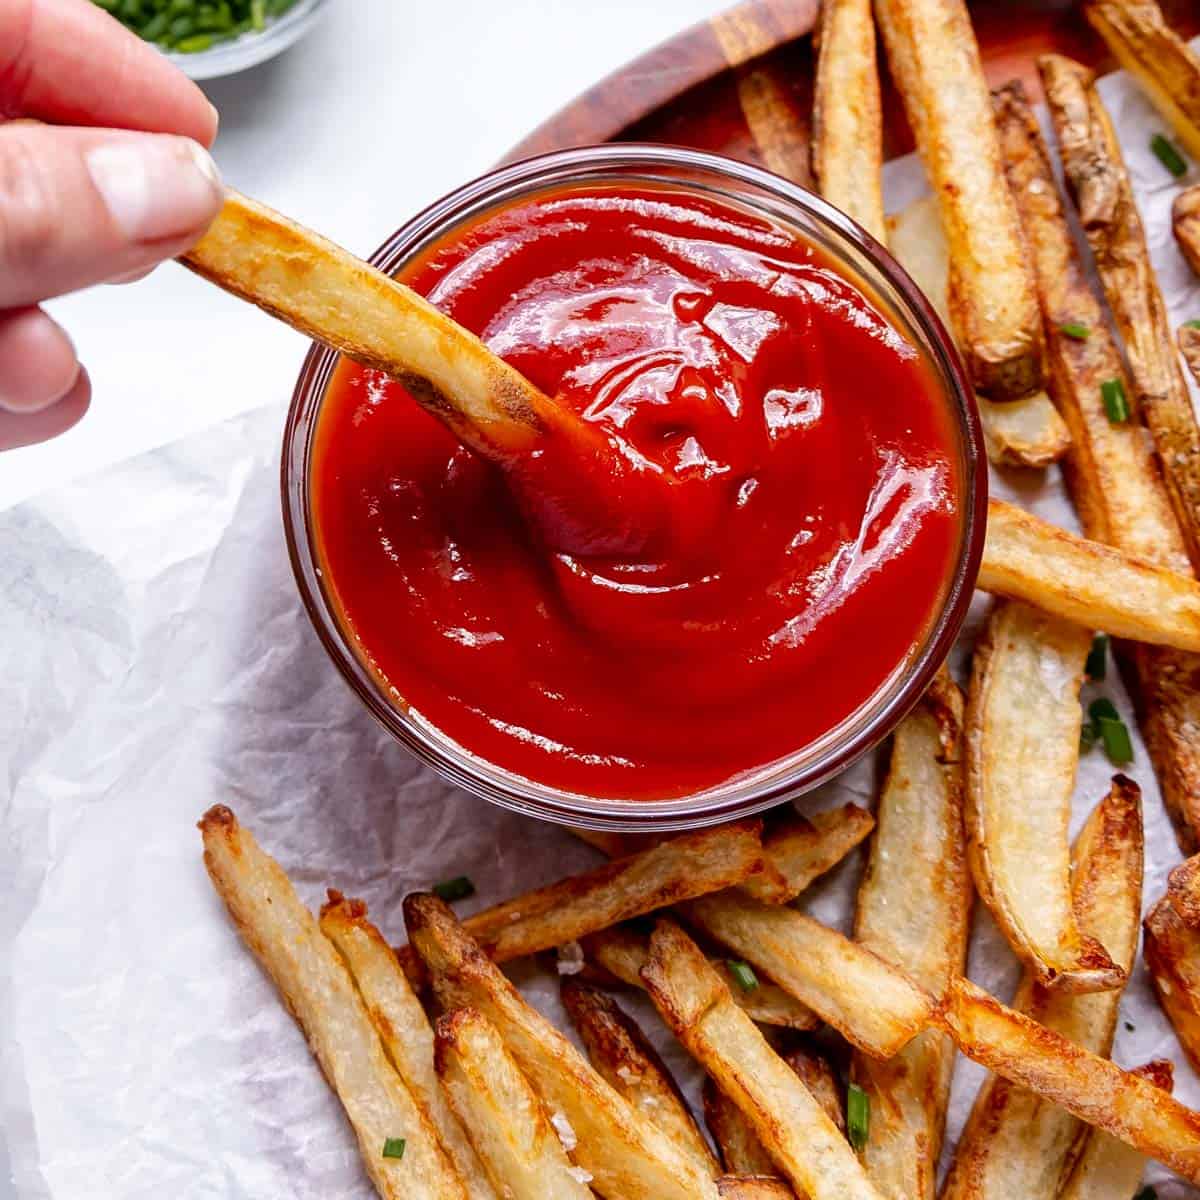 A hand dipping a french fry in ketchup.